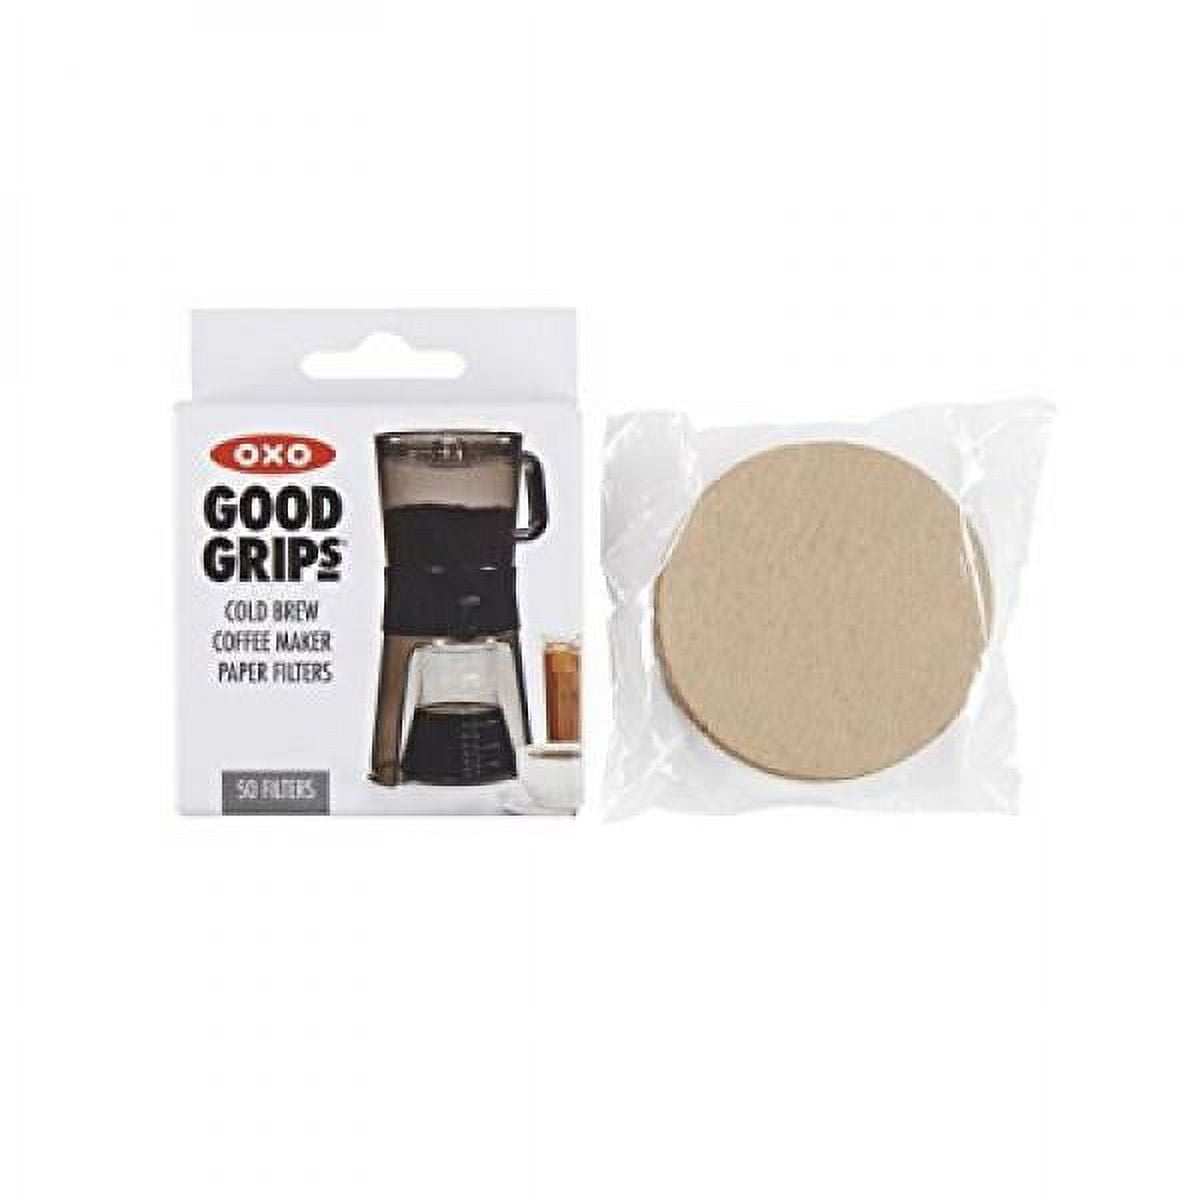 OXO Good Grips Cold Brew Coffee Maker Replacement Paper Filters